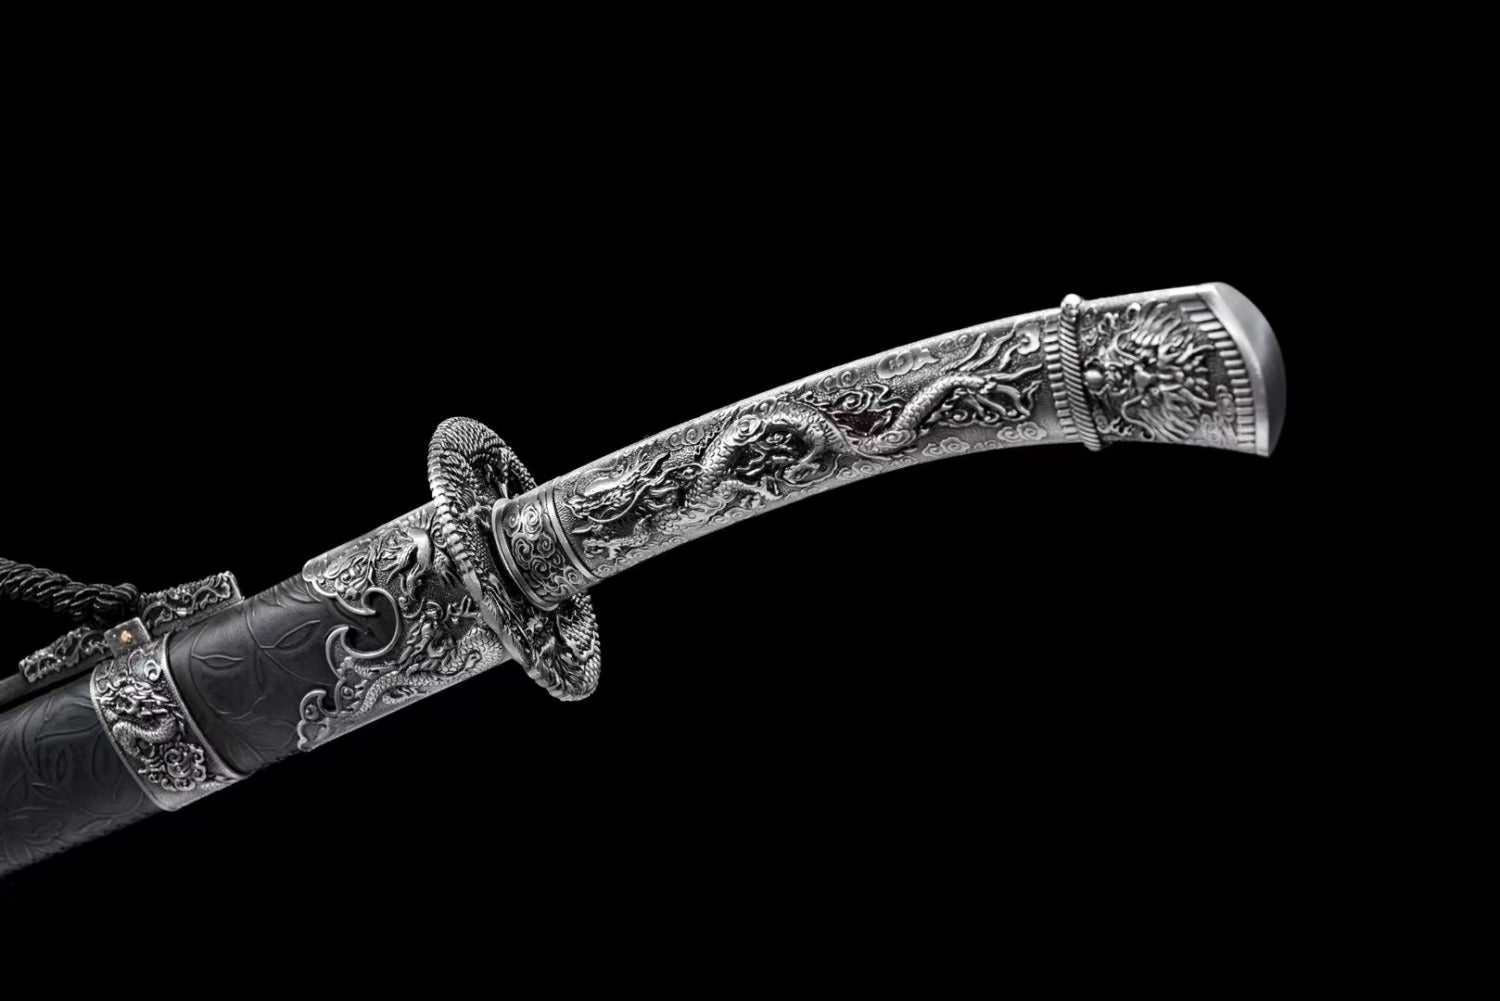 Chinese Meihua Sword- Traditional Handcrafted Sword with High Carbon Steel Blade